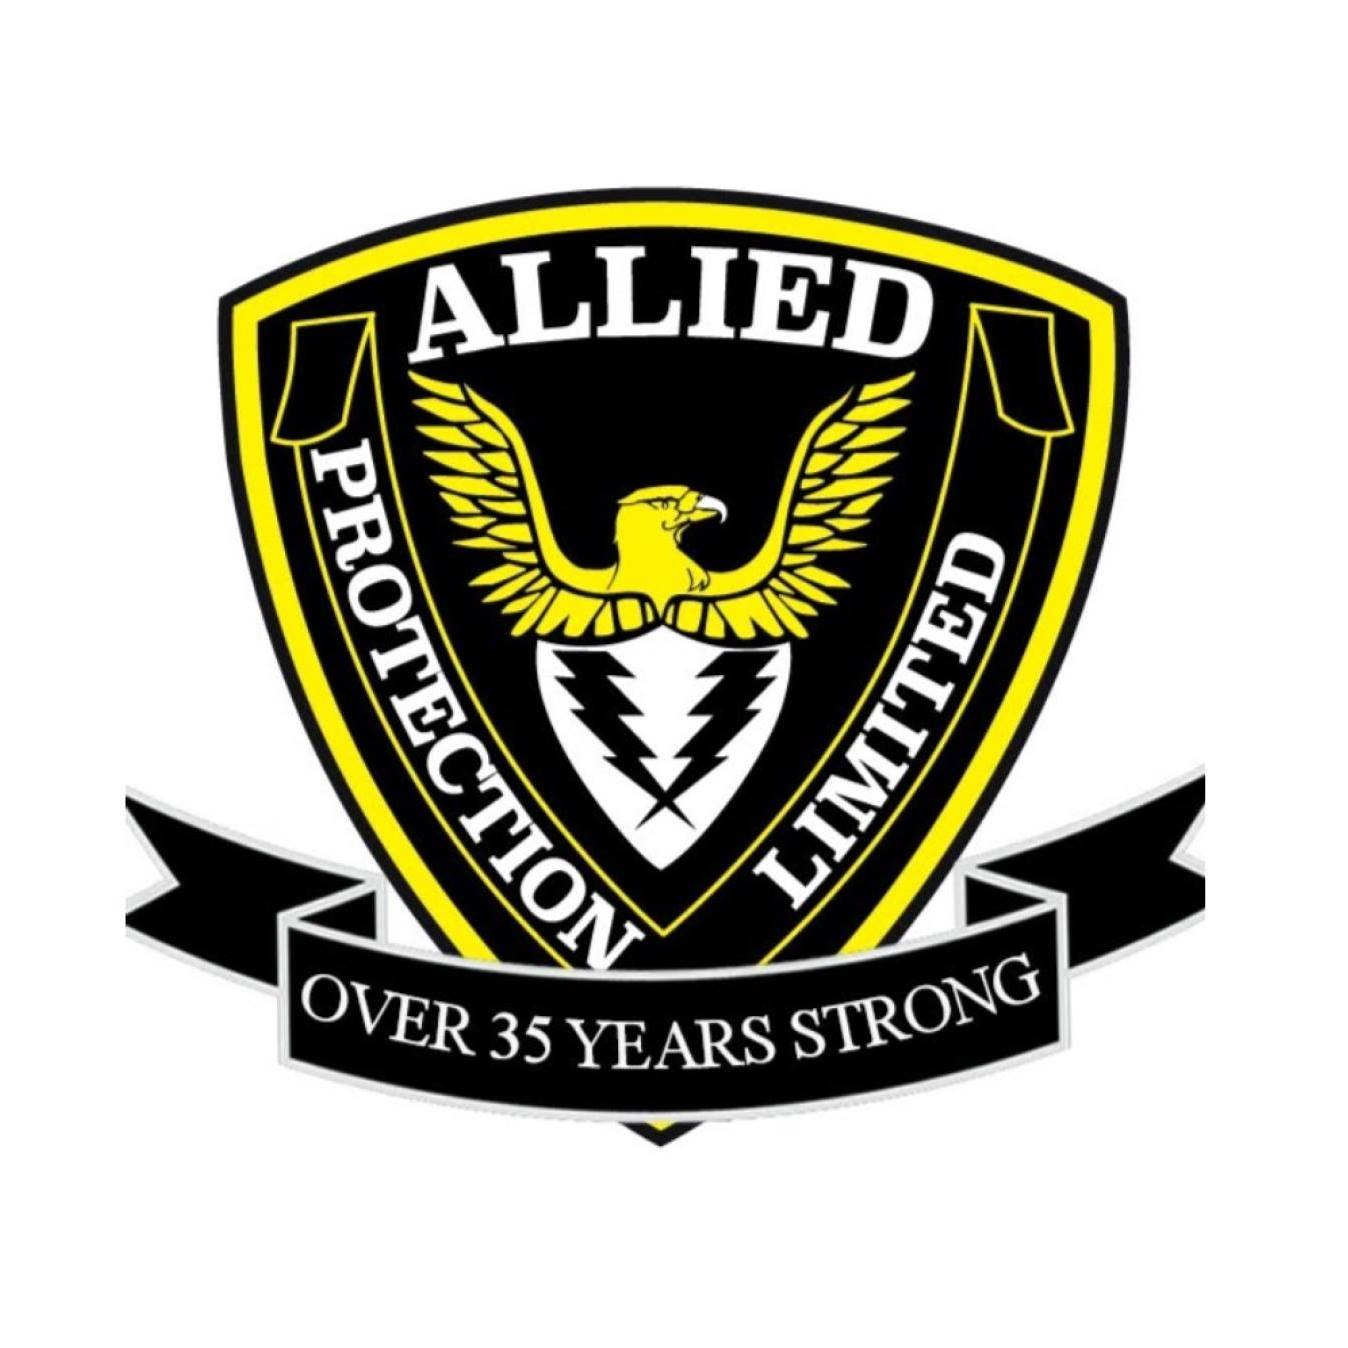 Allied Protection Ltd